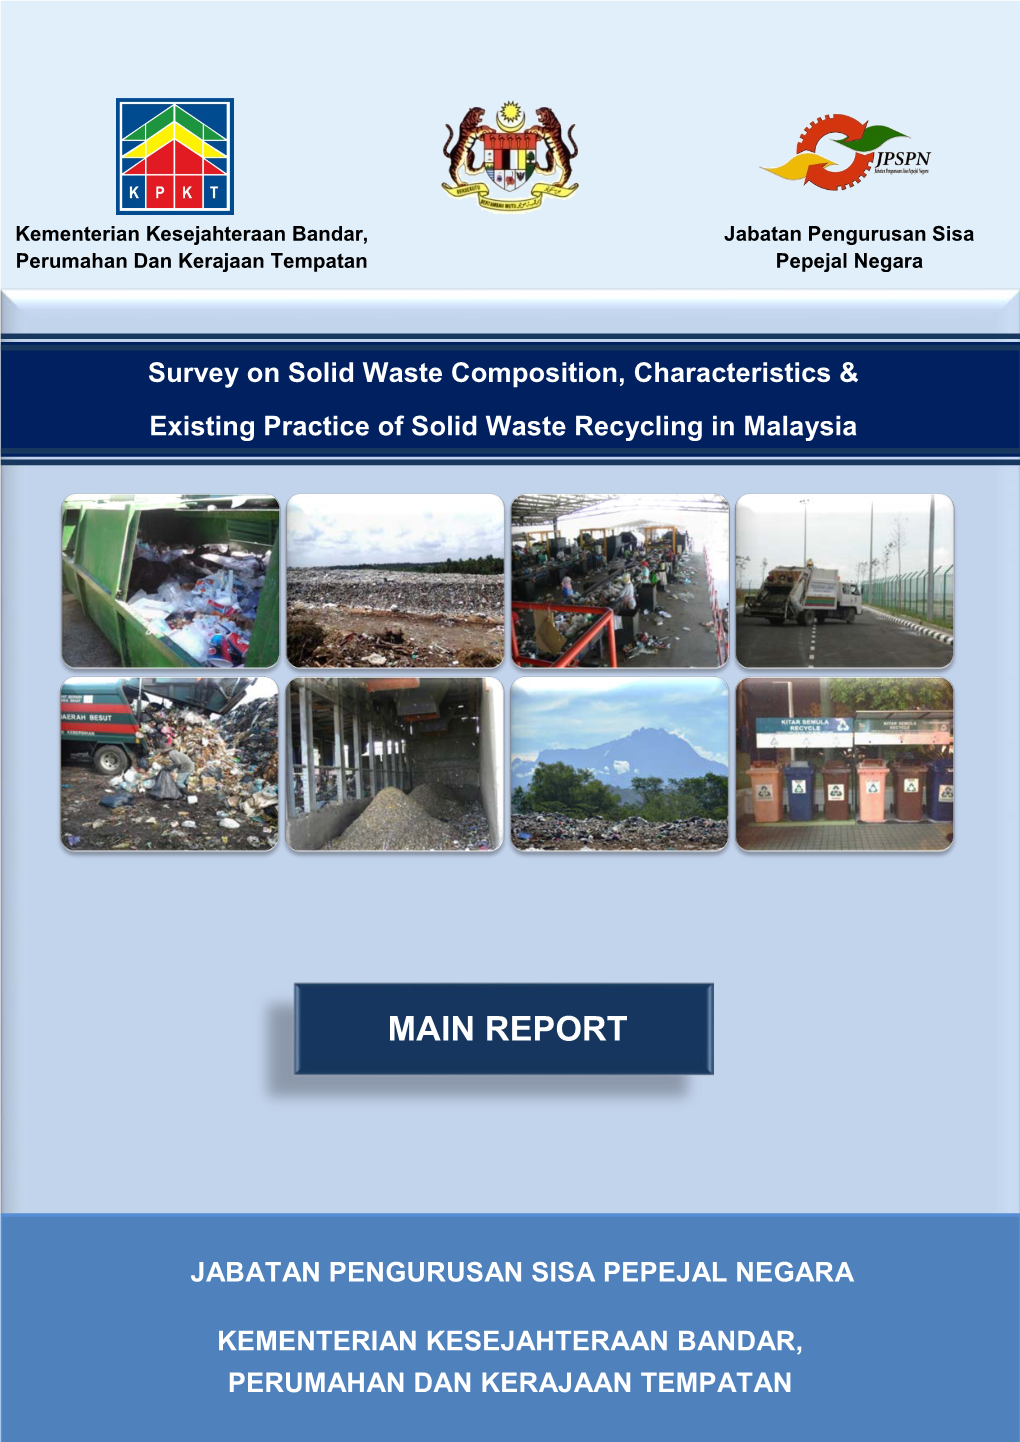 Survey on Solid Waste Composition, Characteristic & Existing Practice